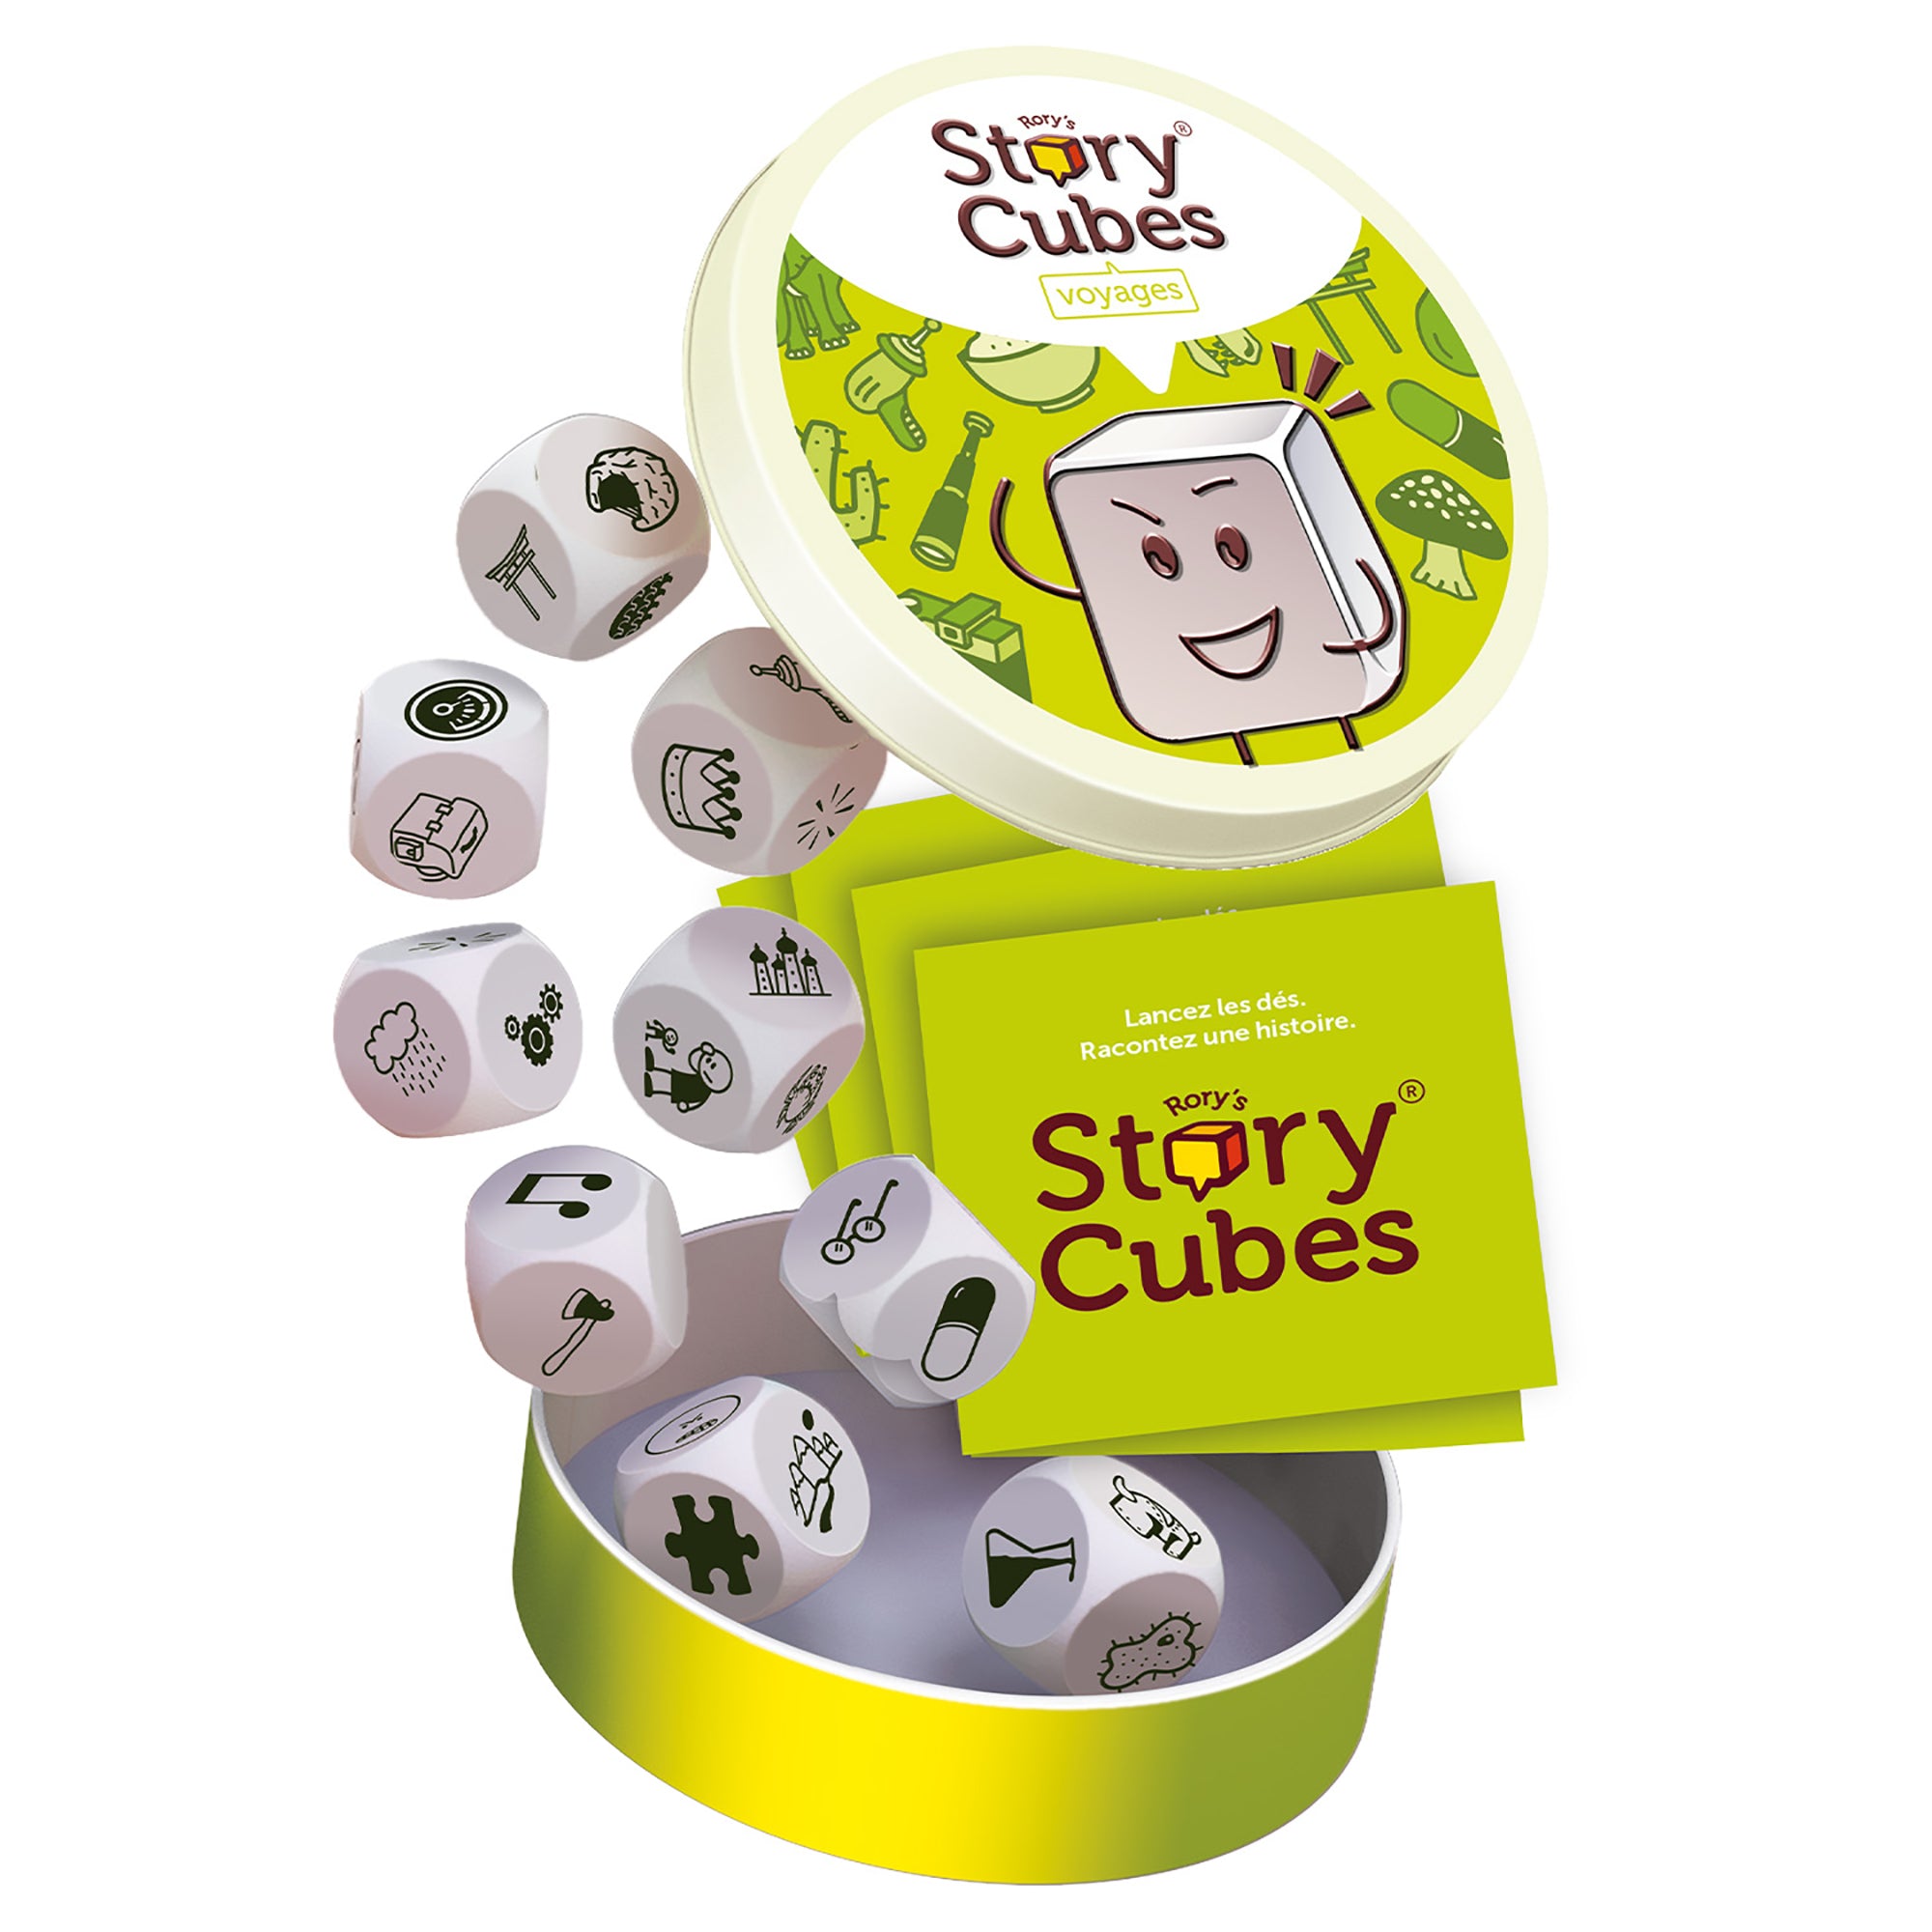 Rory Story Cubes Voyages - Multilingue 6+